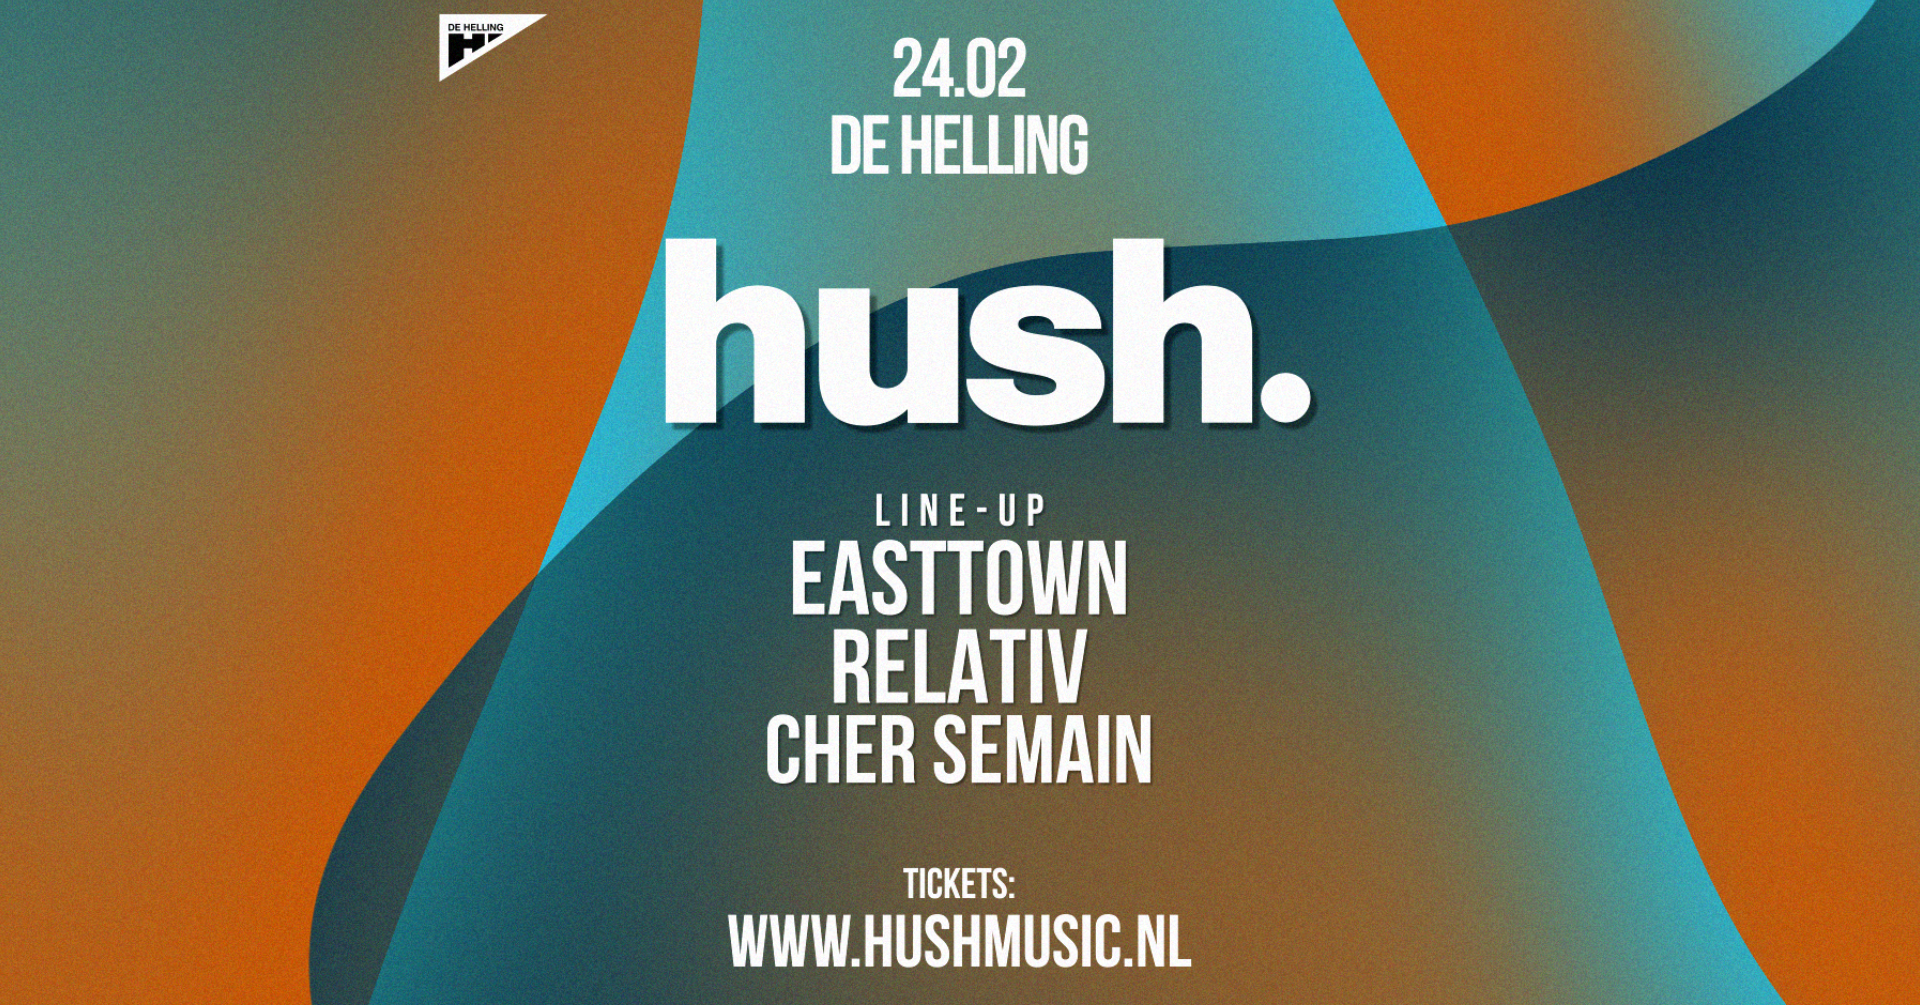 Hush. with Easttown, Relativ & Cher Semain - Página frontal